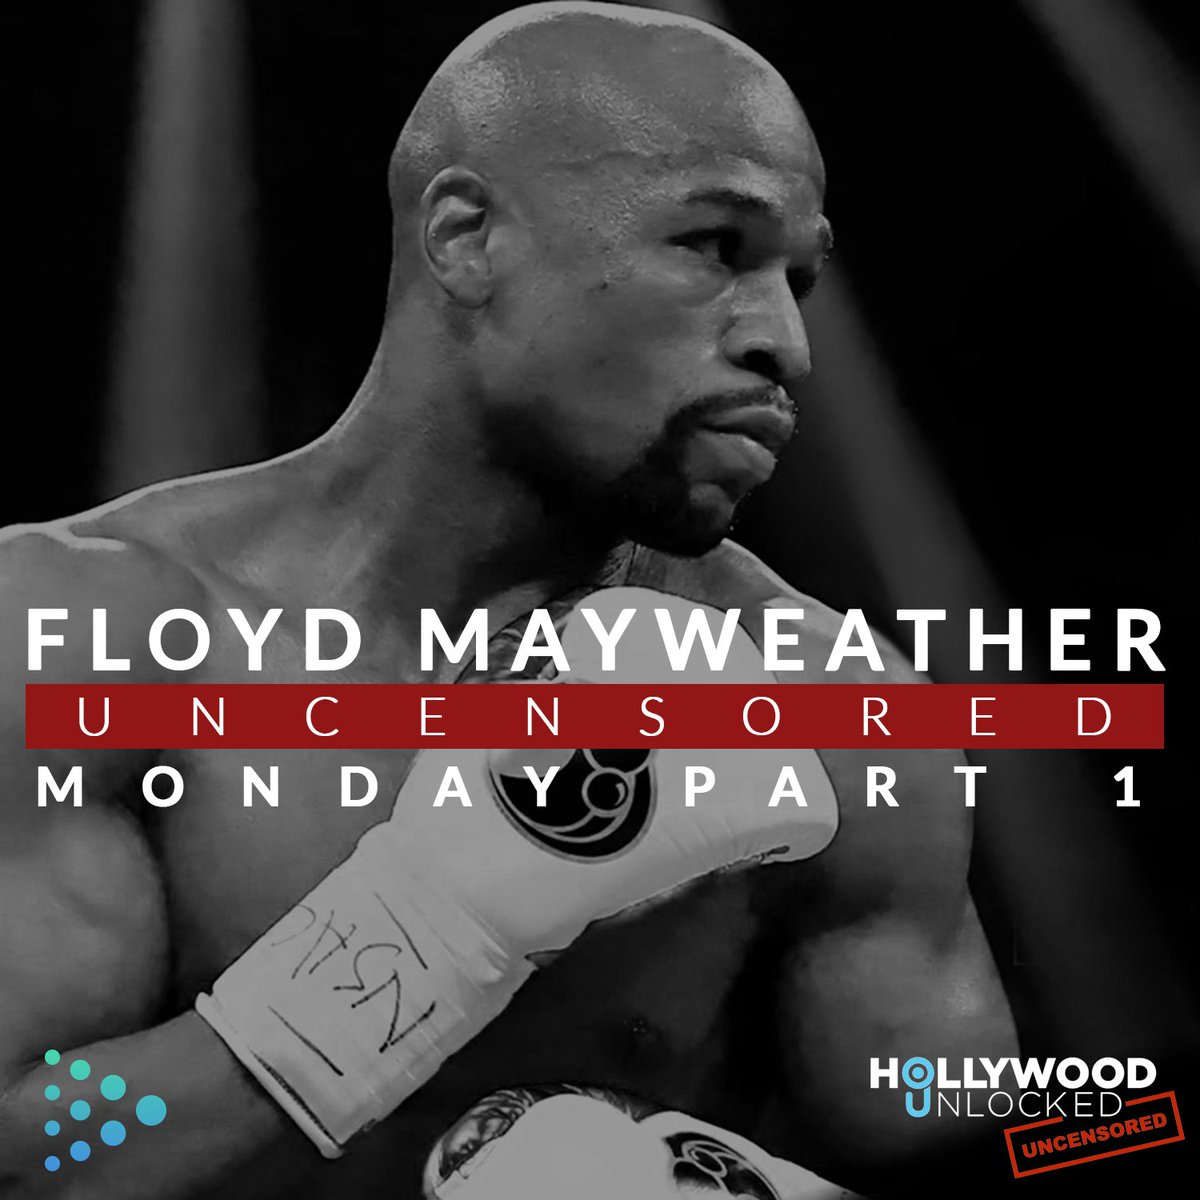 RT @dash_radio: We're one hour away from Part 1/5 of @FloydMayweather's interview with #HollywoodUnlockedUncensored!
???? #iCraft https://t.co…